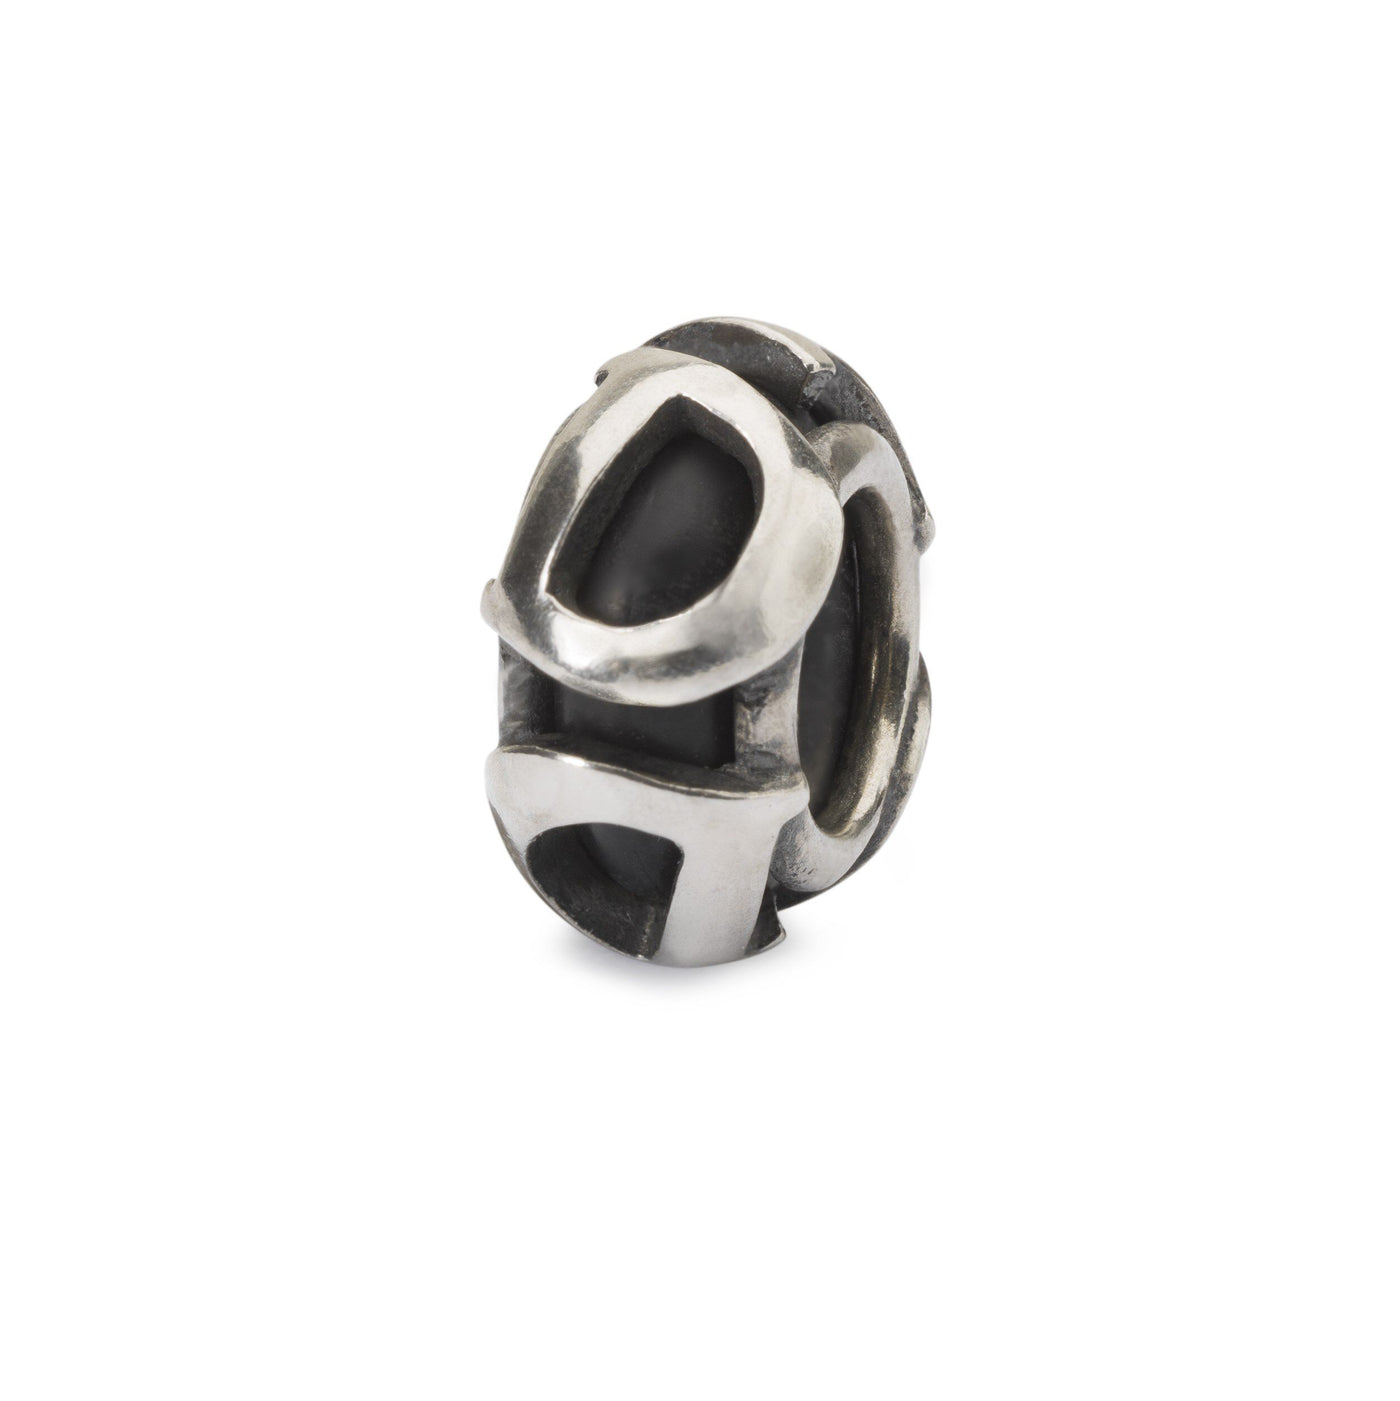 D Spacer - Trollbeads Canada